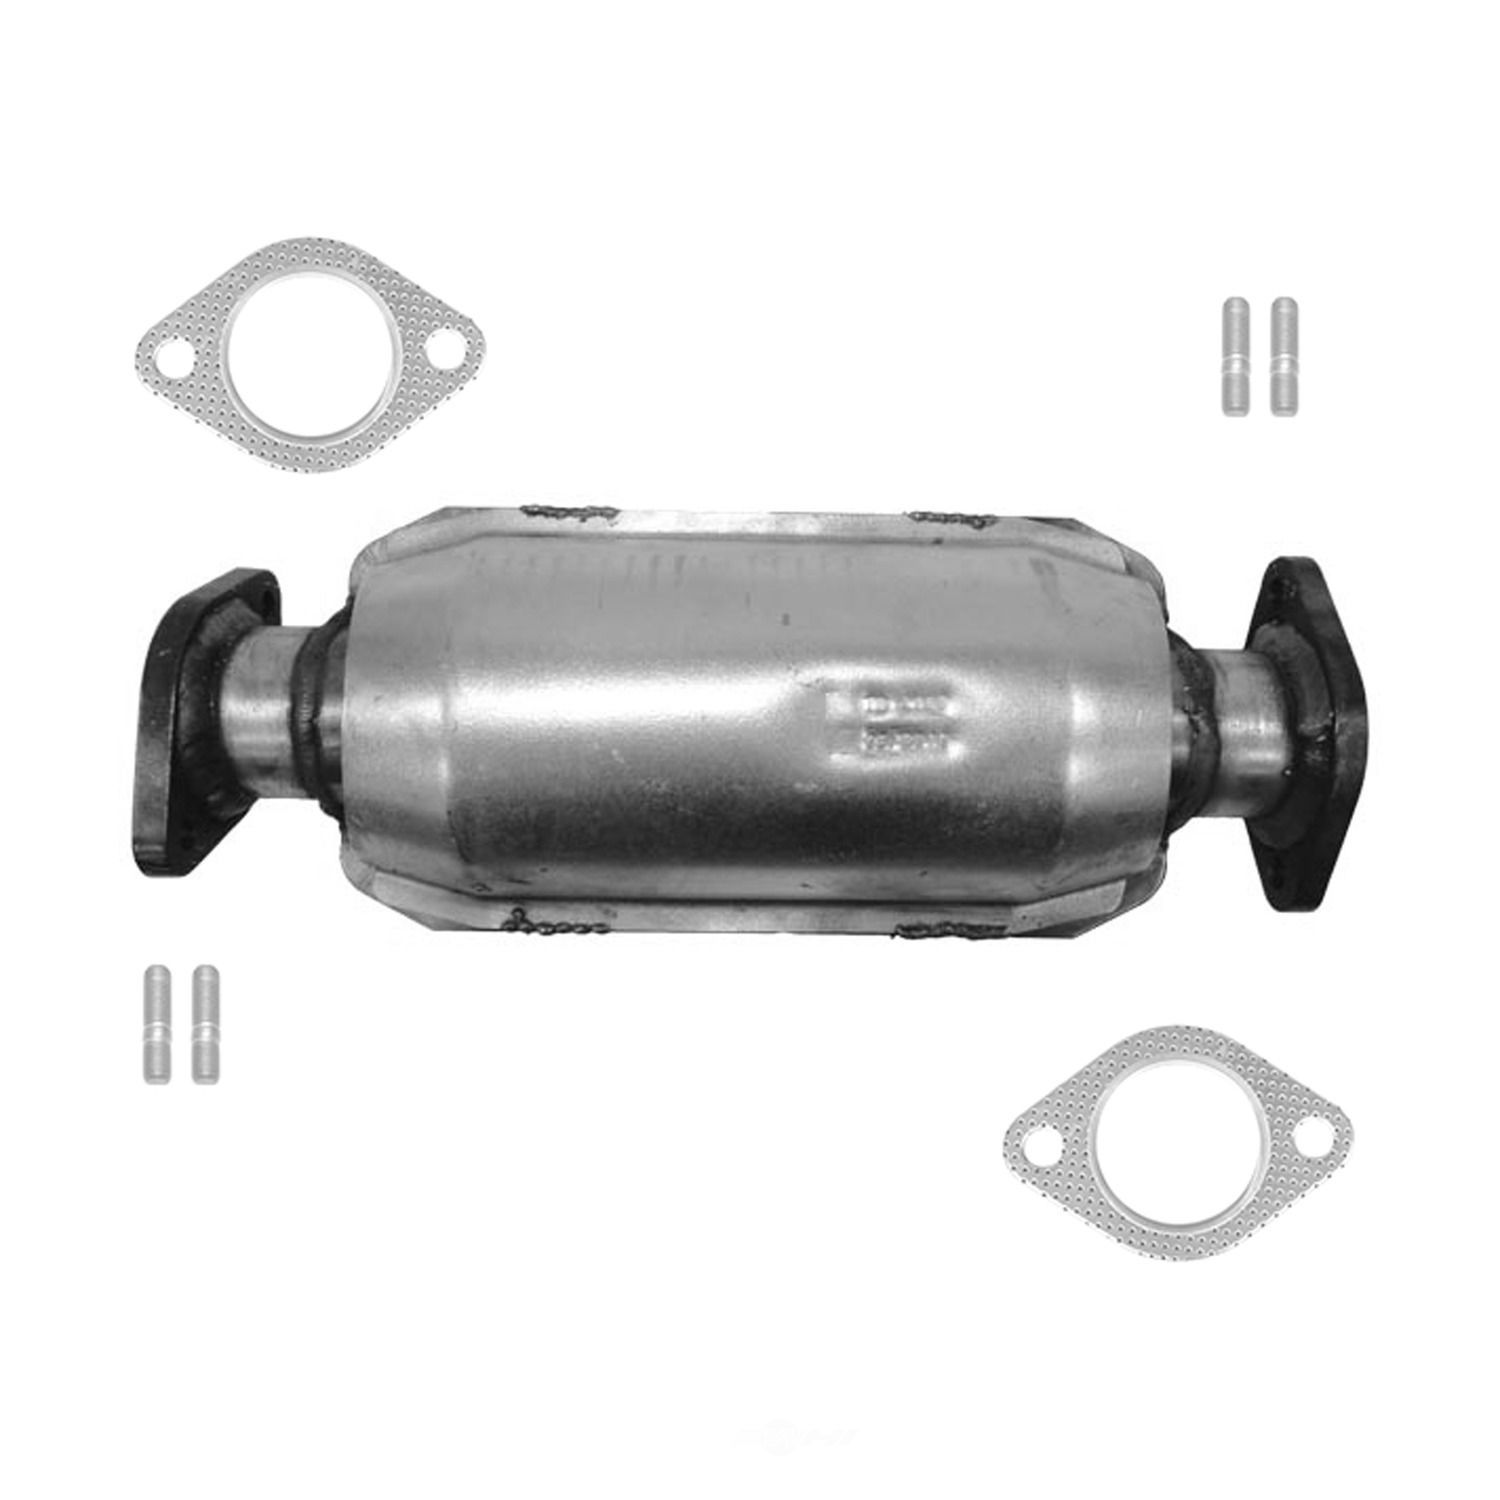 AP EXHAUST W/FEDERAL CONVERTER - Direct Fit Converter (Rear) - APF 642178